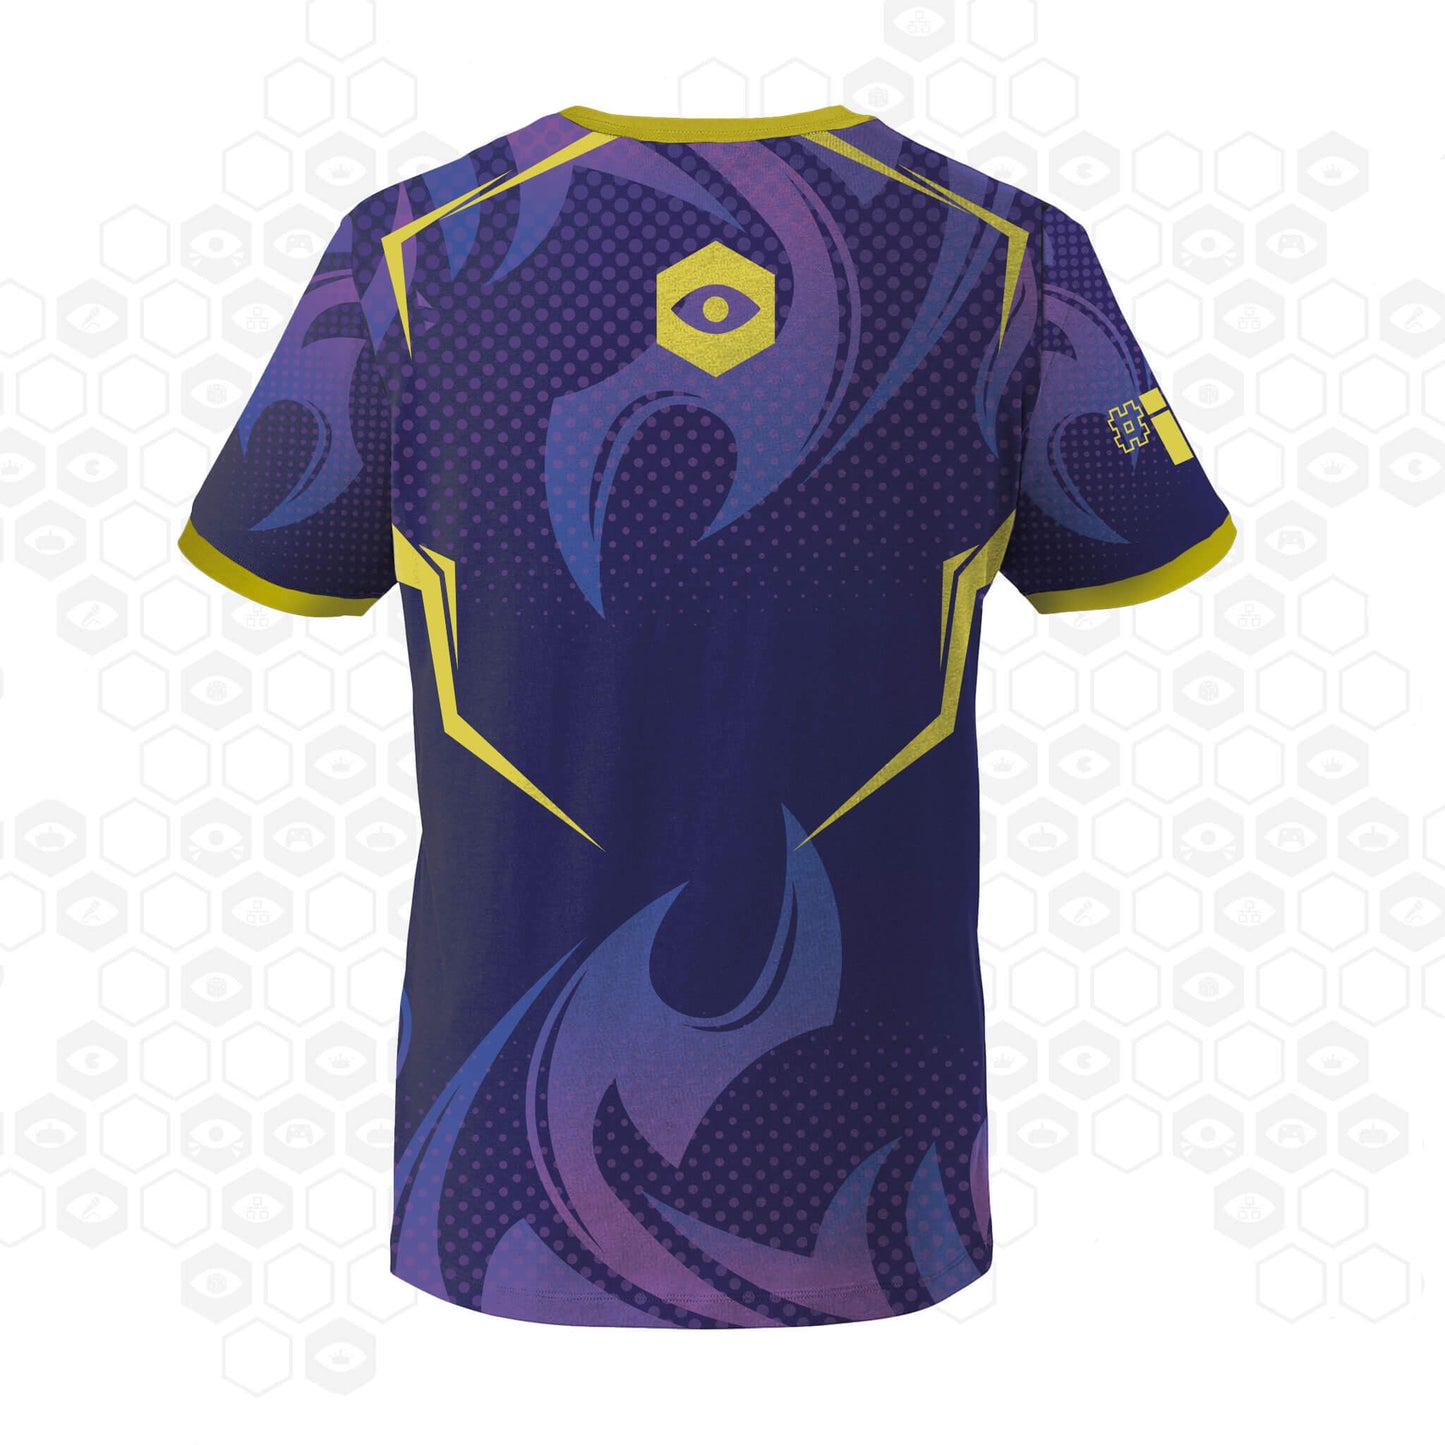 Official i70 Steel Flame eSports Jersey - Purple/Yellow - Back | Insomnia Gaming Festival